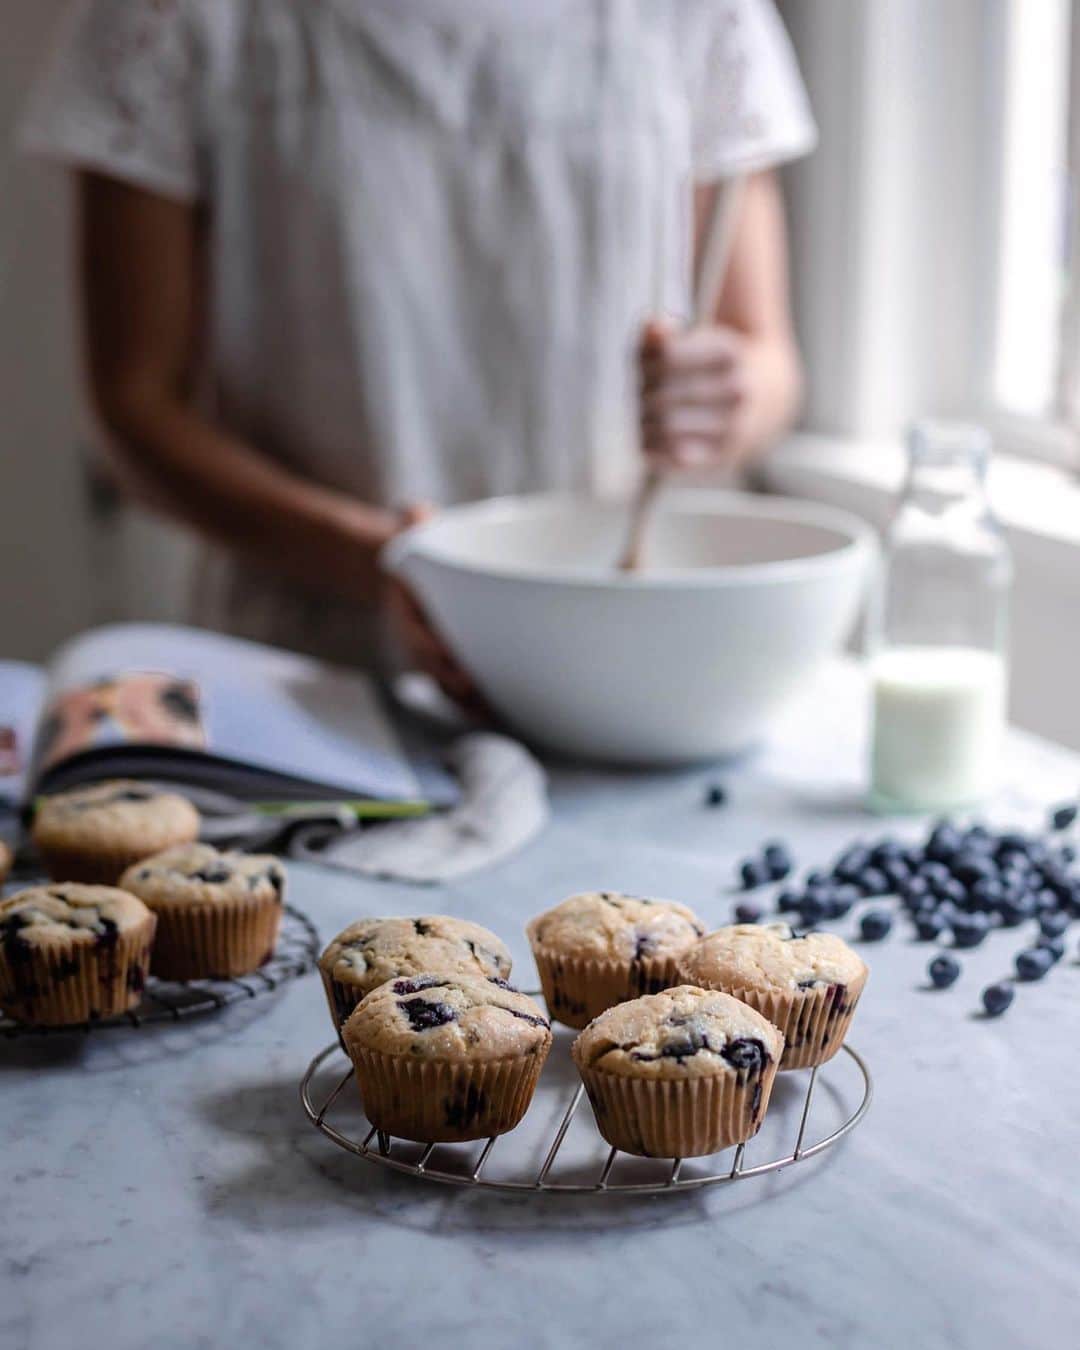 Krissyのインスタグラム：「made up batches of @edibleliving blueberry muffins yesterday (recipe from her new book Every Day is Saturday) . using our summer stores of blueberries pulled from the freezer, warming the kitchen, windows open to the autumnal breezes . then wrapping them carefully in parchment and trundling babé and muffins off to his grandparents while the Mr and I make for the Berkshires- celebrating 6 years of marriage ✨ . . . . #everydayissaturdaycookbook #weekendfood #mynewengland #eleganceintheeveryday #myeverydaymagic #simplejoys #embracingtheseasons #thebakefeed #poetryofsimplethings #farmtotable #madefromscratch #makeitdelicious #flashesofdelight #rslove #eattheworld #onmytable #momentsofmine #cakesofinstagram」